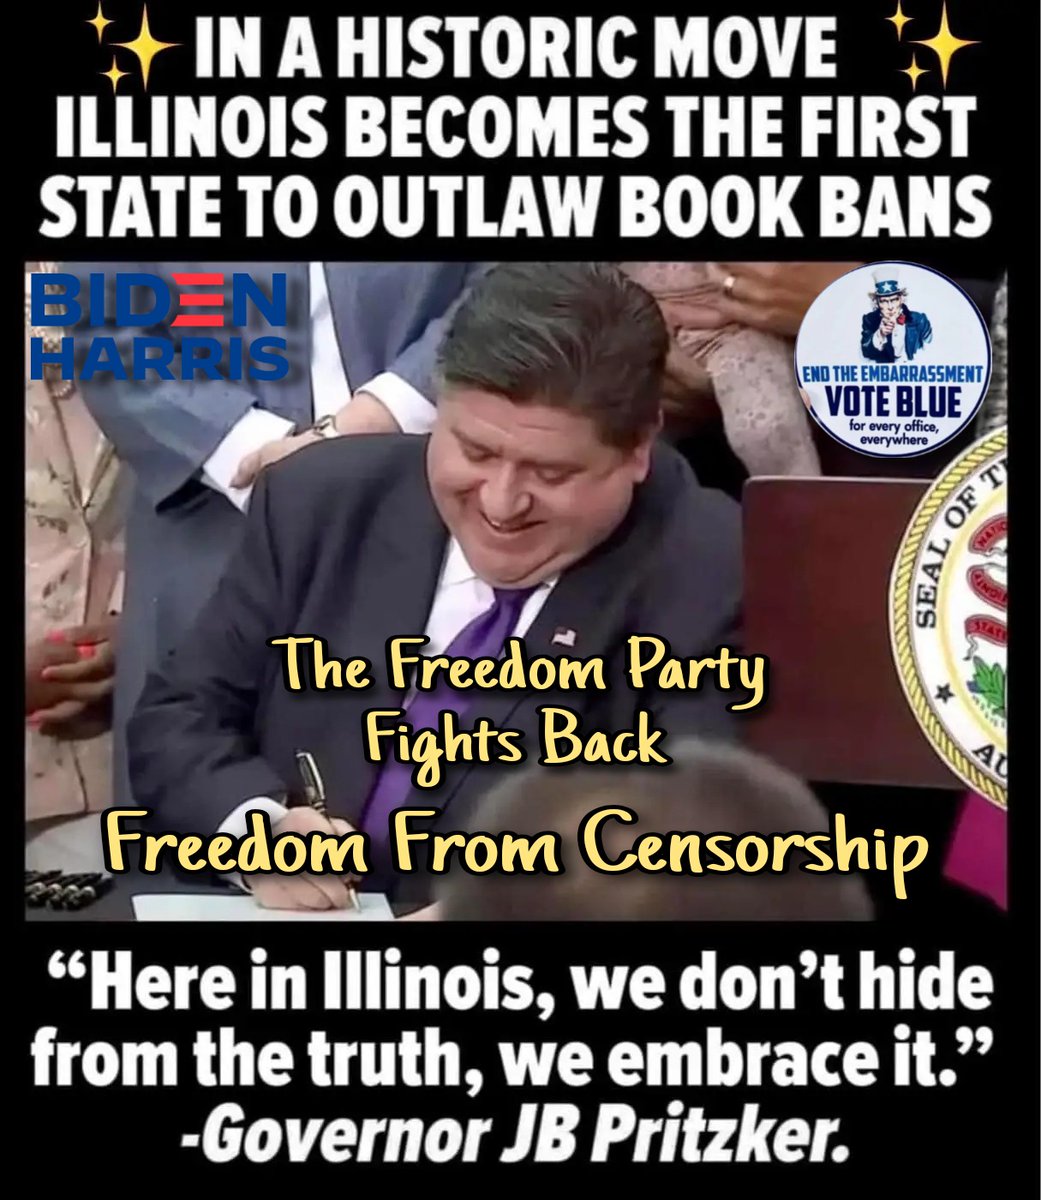 Yea for the #BlueTeam where #Illinois @GovPritzker became the first state to #BanBookBans & strike back at #FascistGOP #censorship! Books open the mind to different ideas, places & culture, which interferes with the #fascist need to control the citizens. Thank you Gov! #democracy